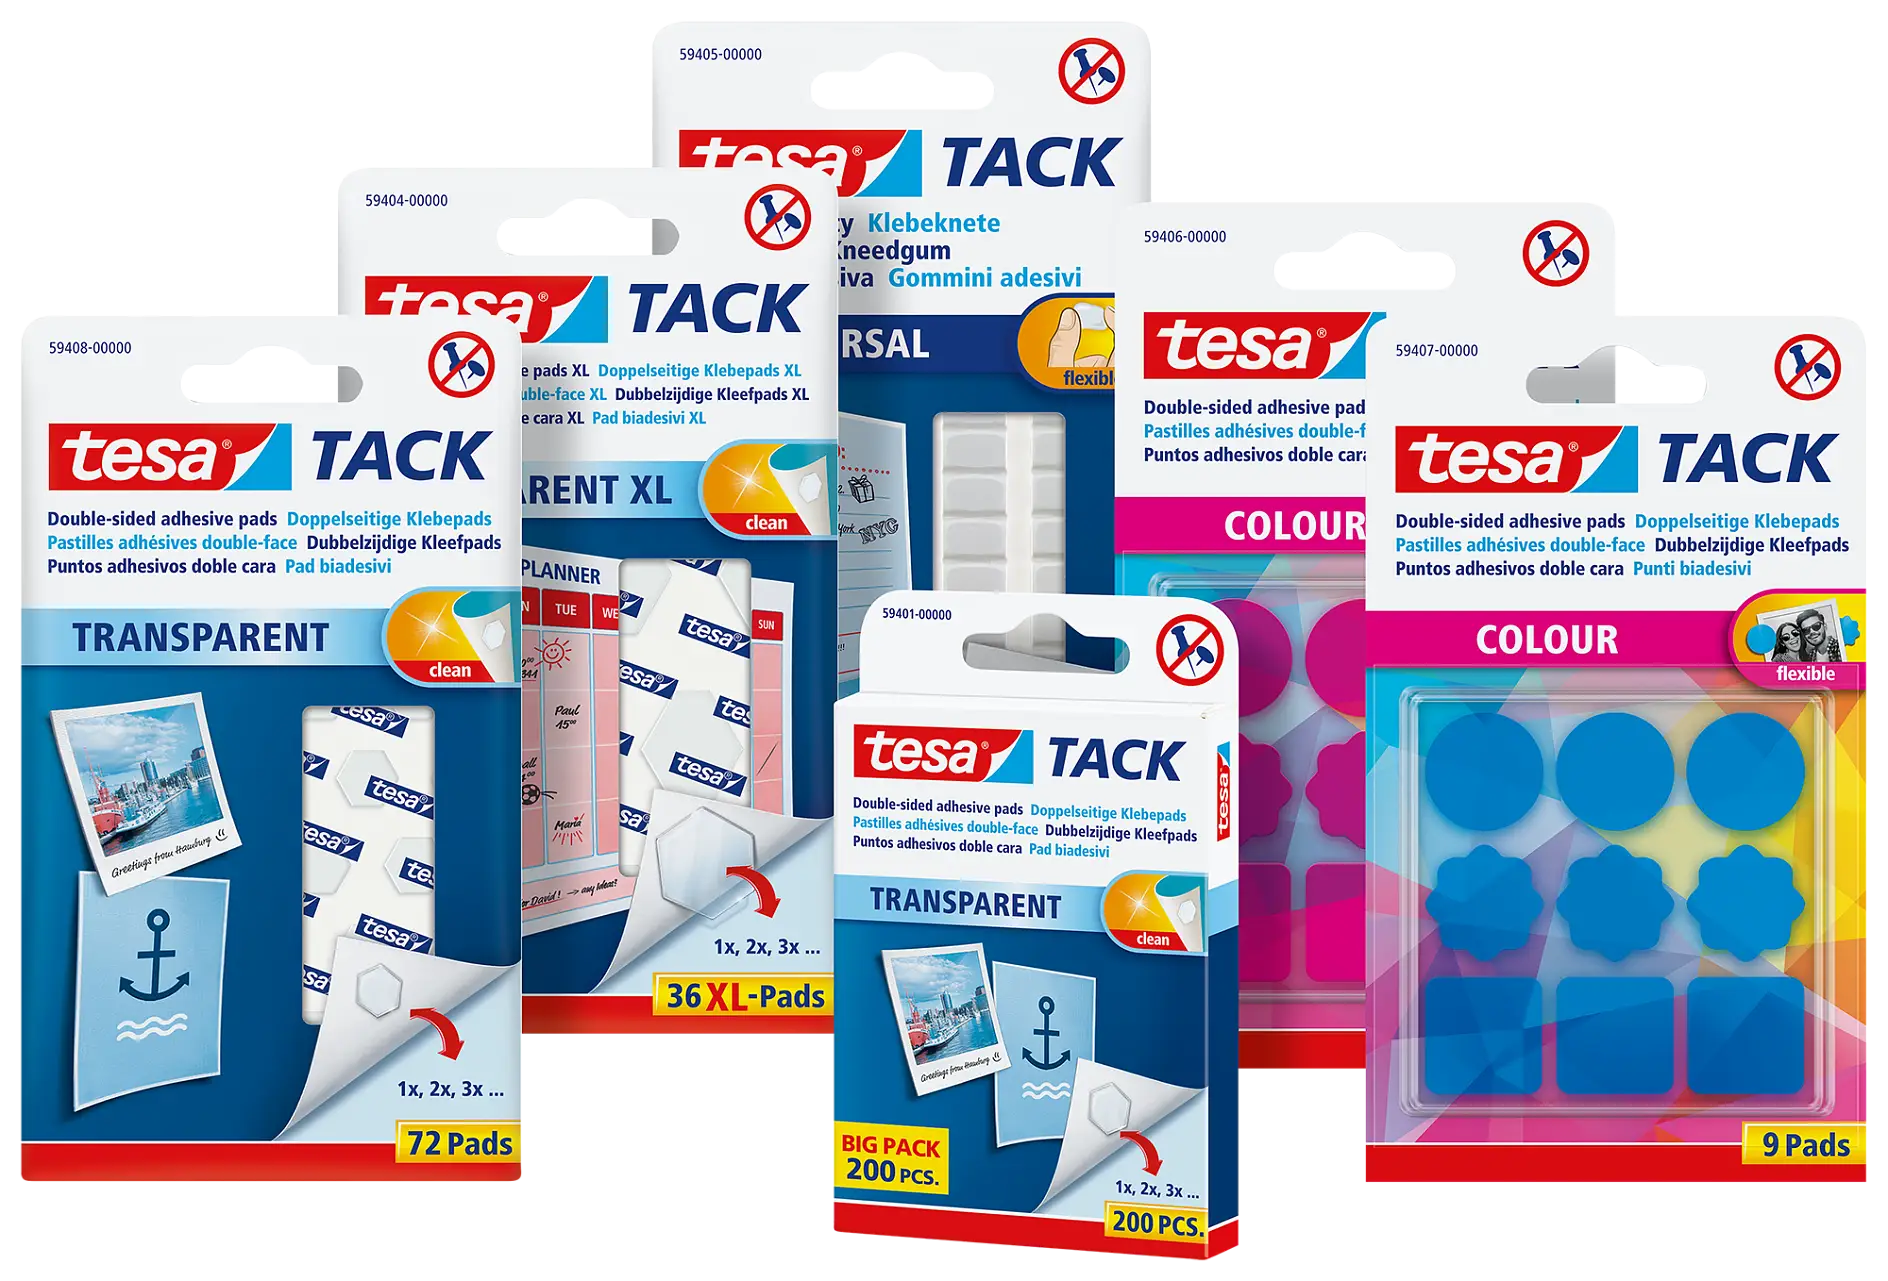 New additions complete the tesa TACK Assortment